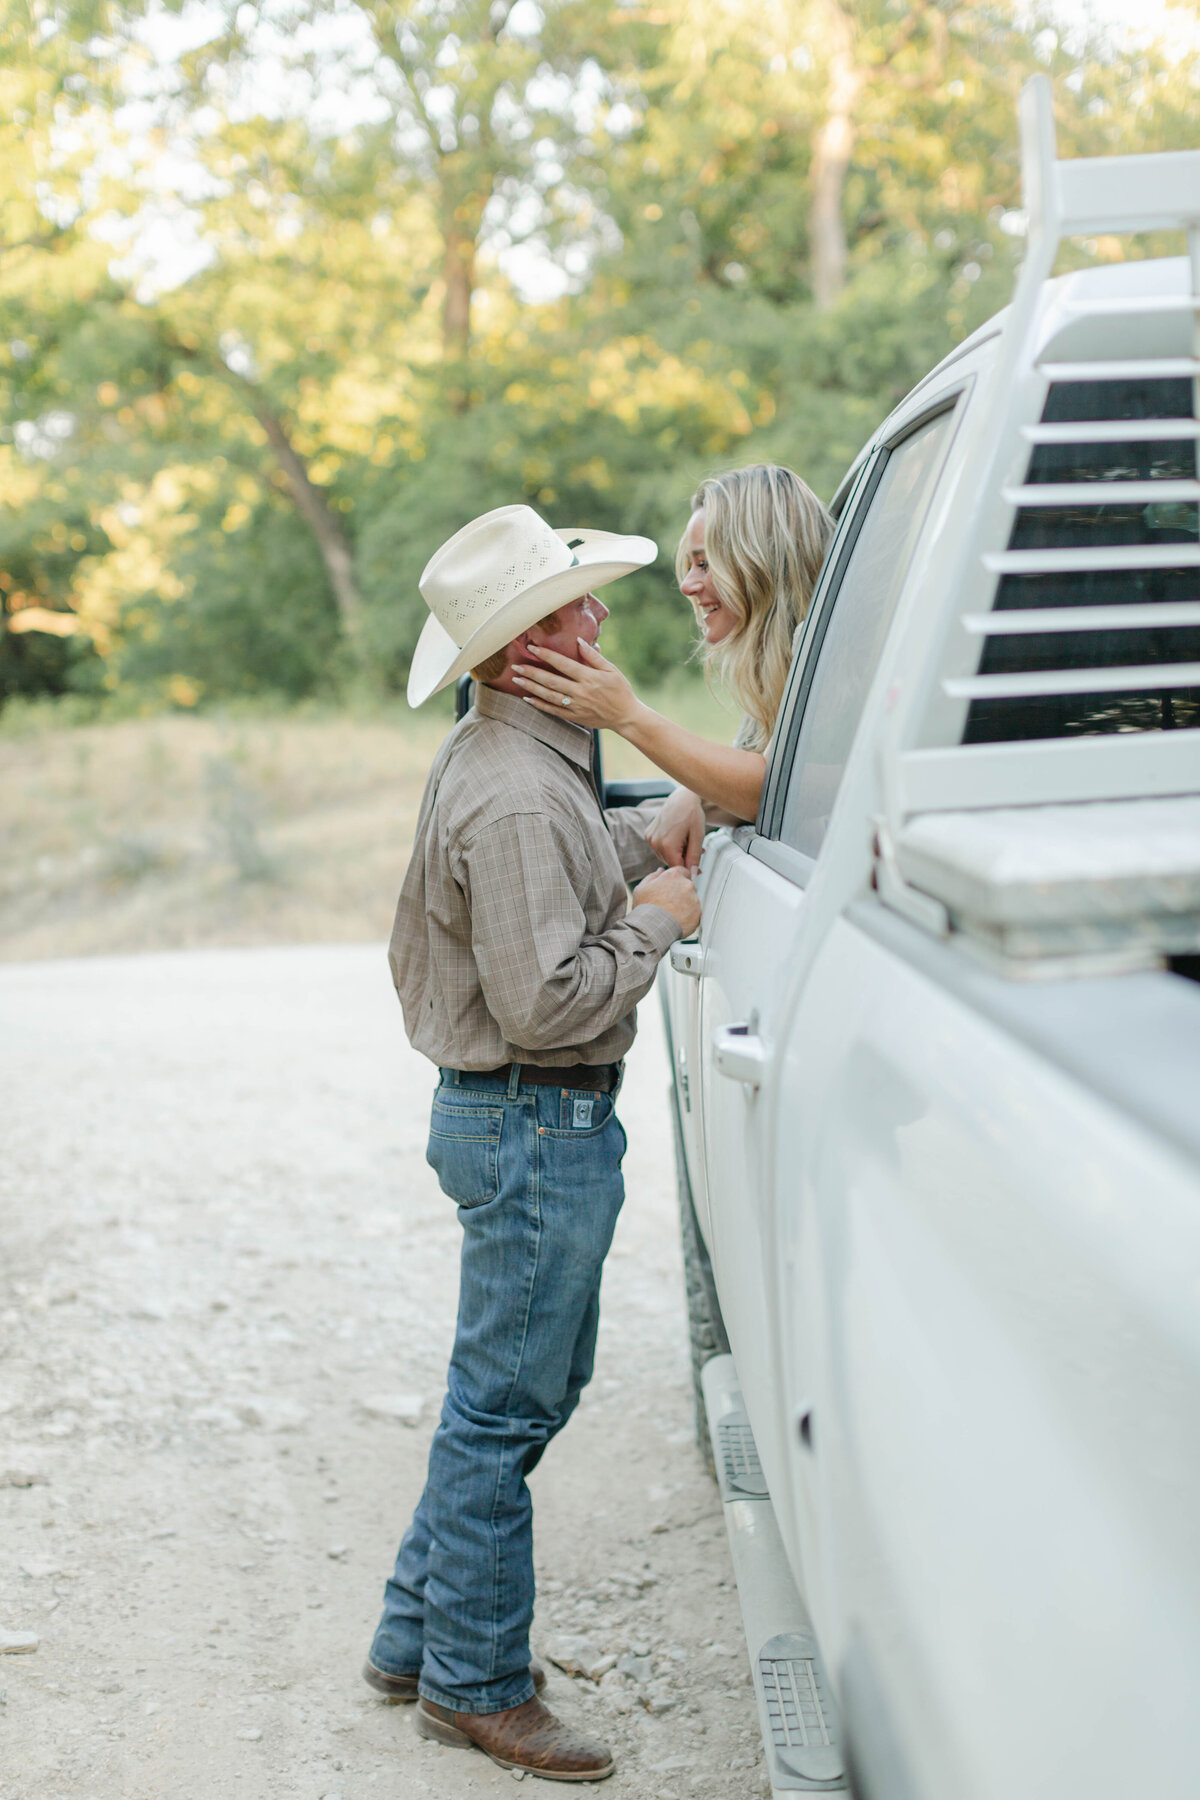 outdoor engagement session in dallas fort worth, texas